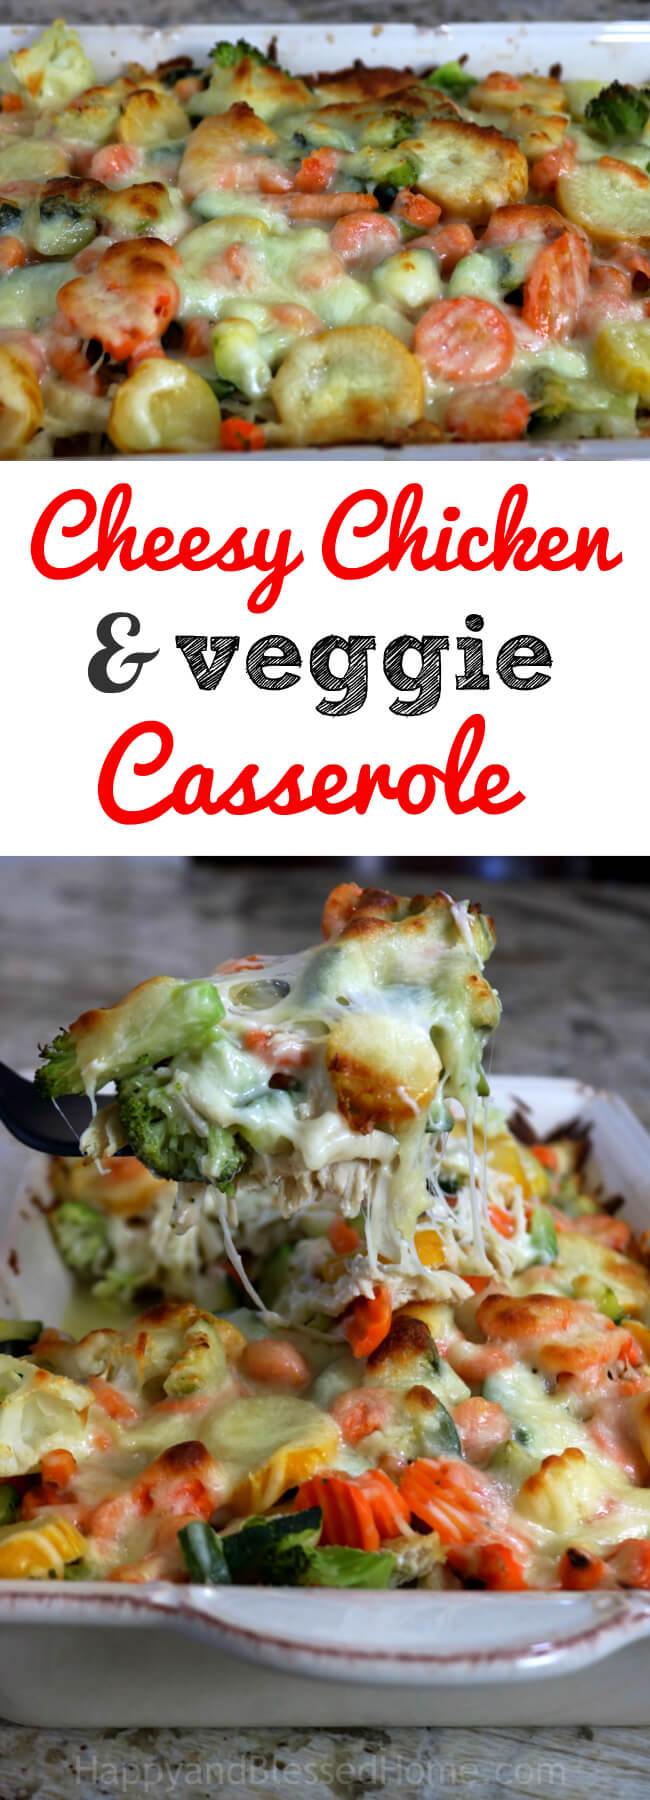 Easy Vegetable Casserole Recipes
 Easy Cheesy Chicken Ve able Casserole